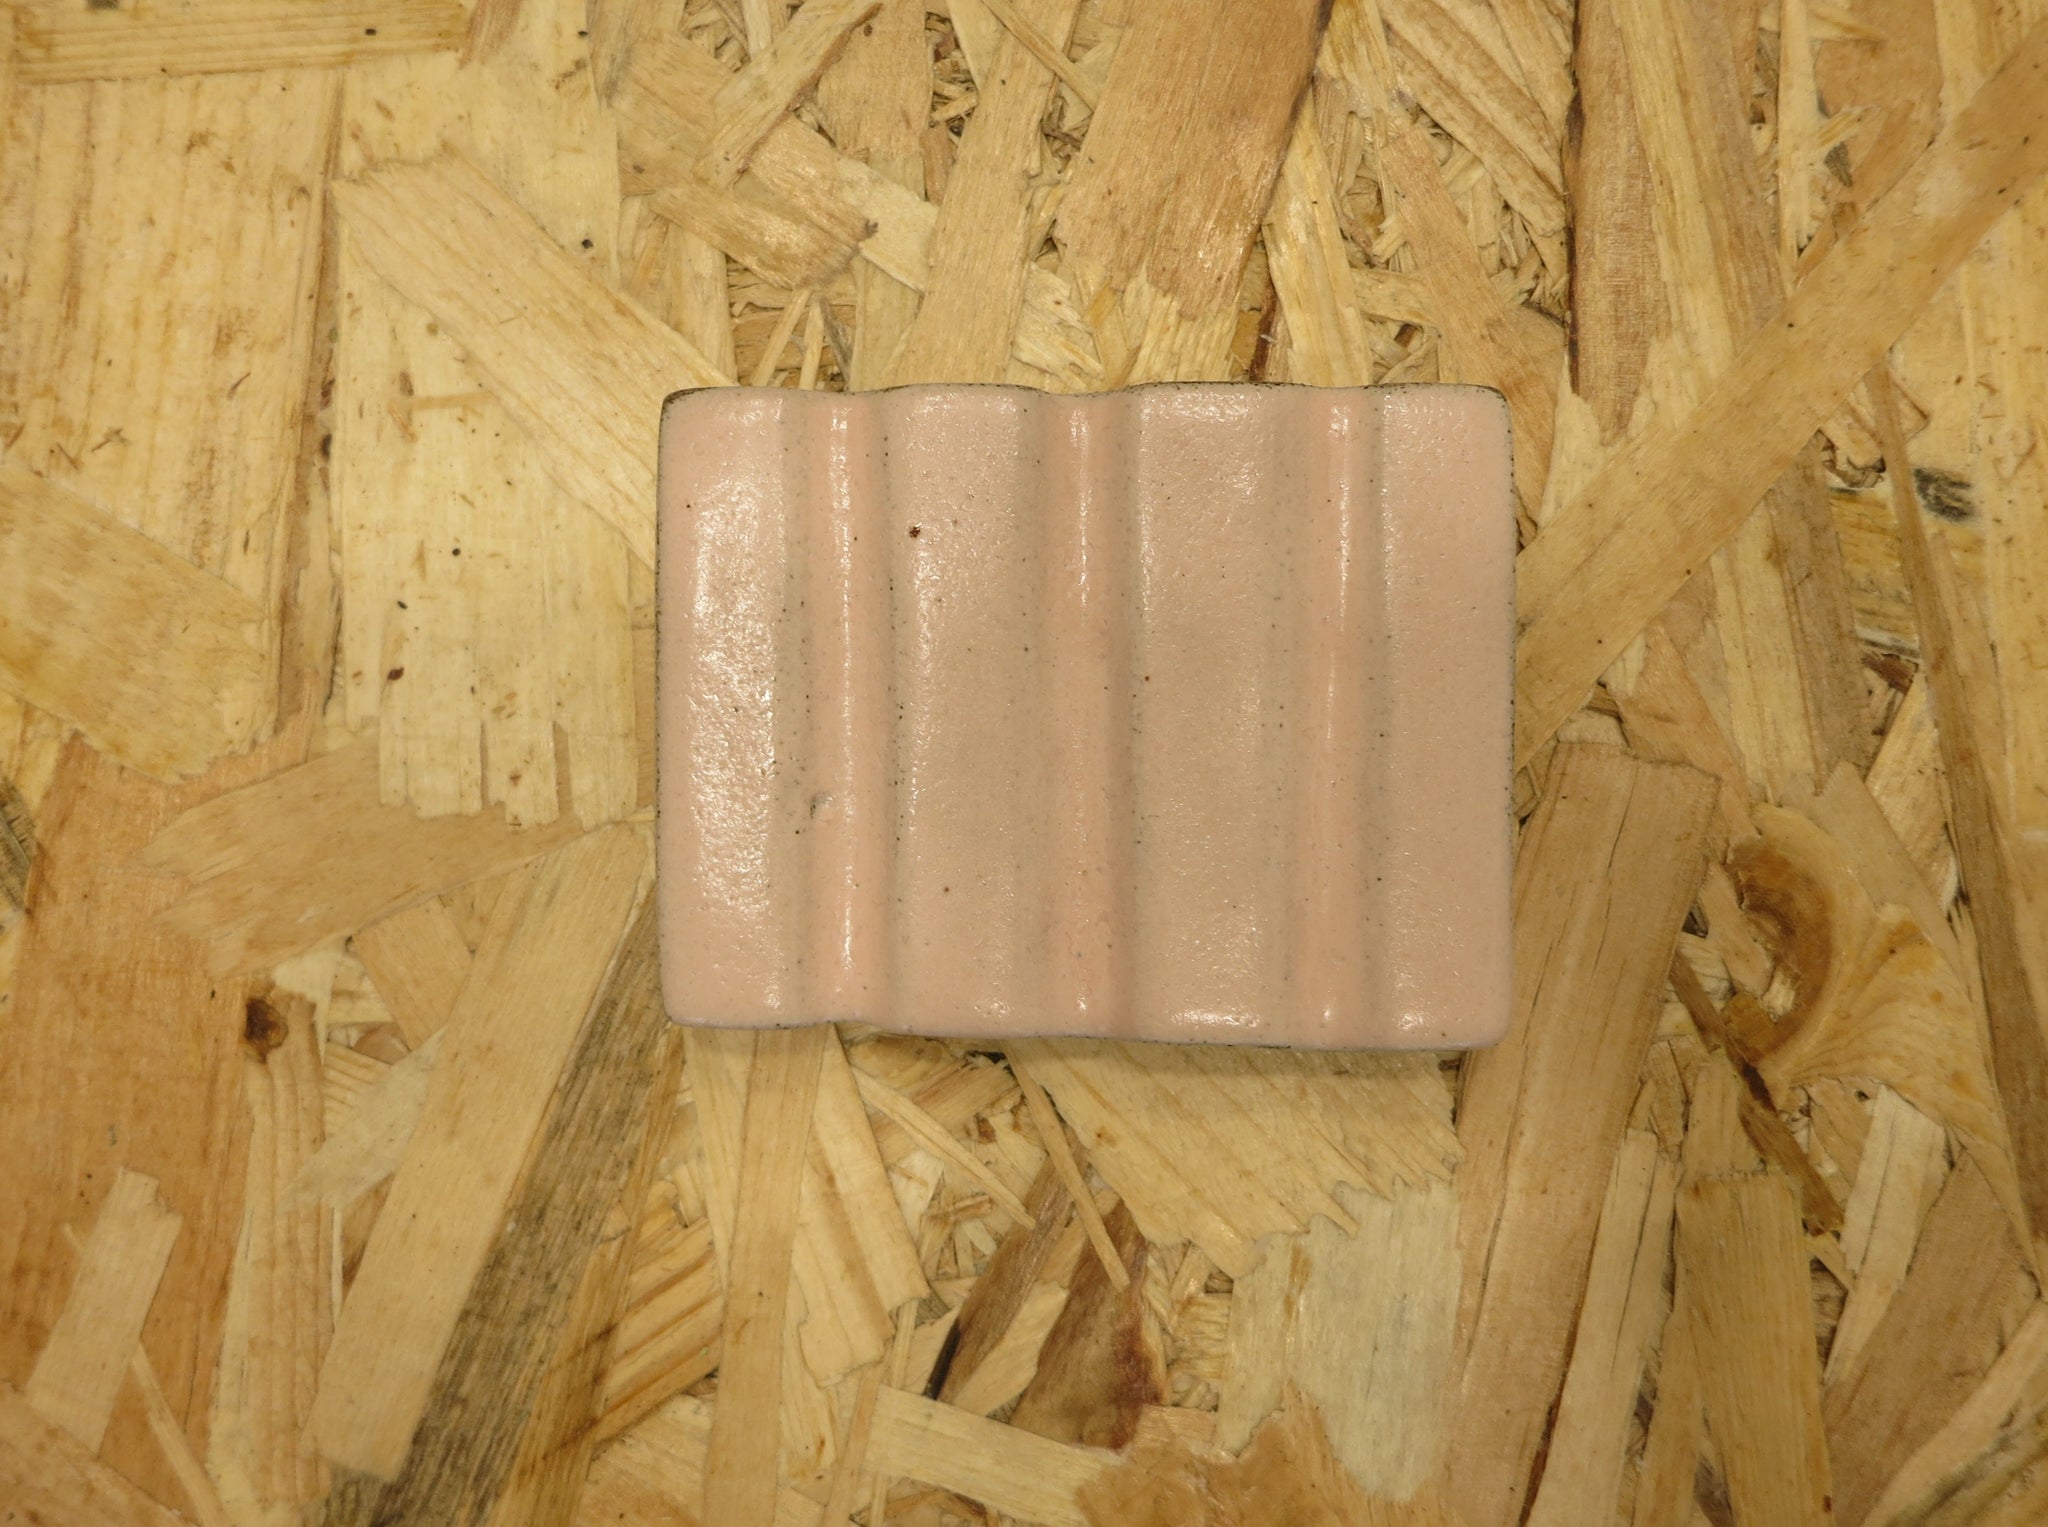 Soap Holder in Ceramic / Σαπουνοθήκη κεραμικη - pink with lines